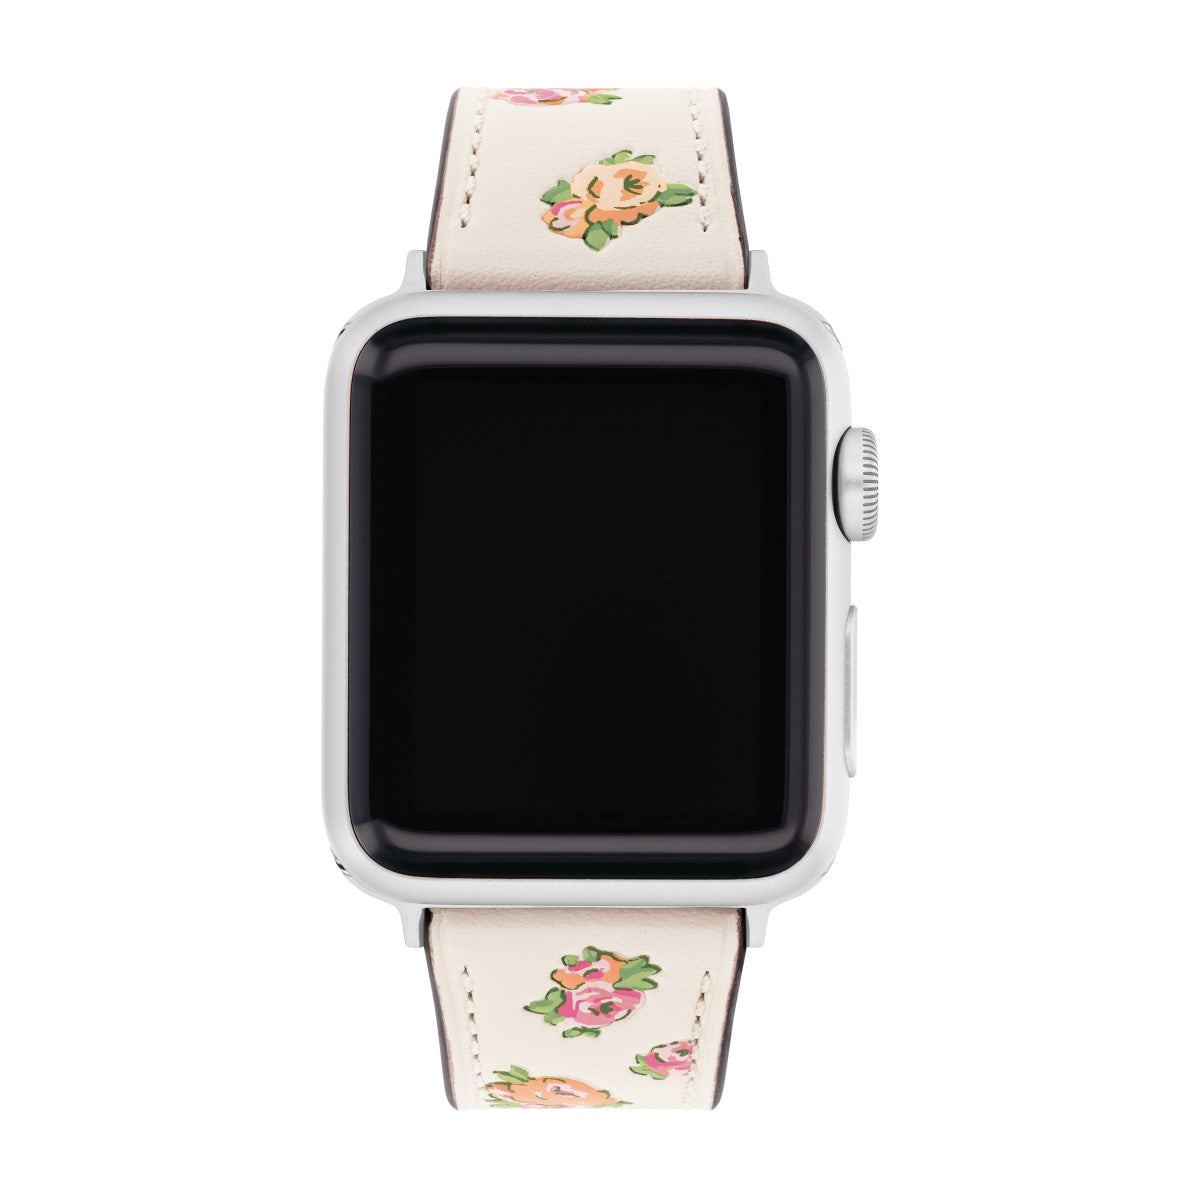 Coach Flower Design White Leather Apple Watch Strap Only. Fits